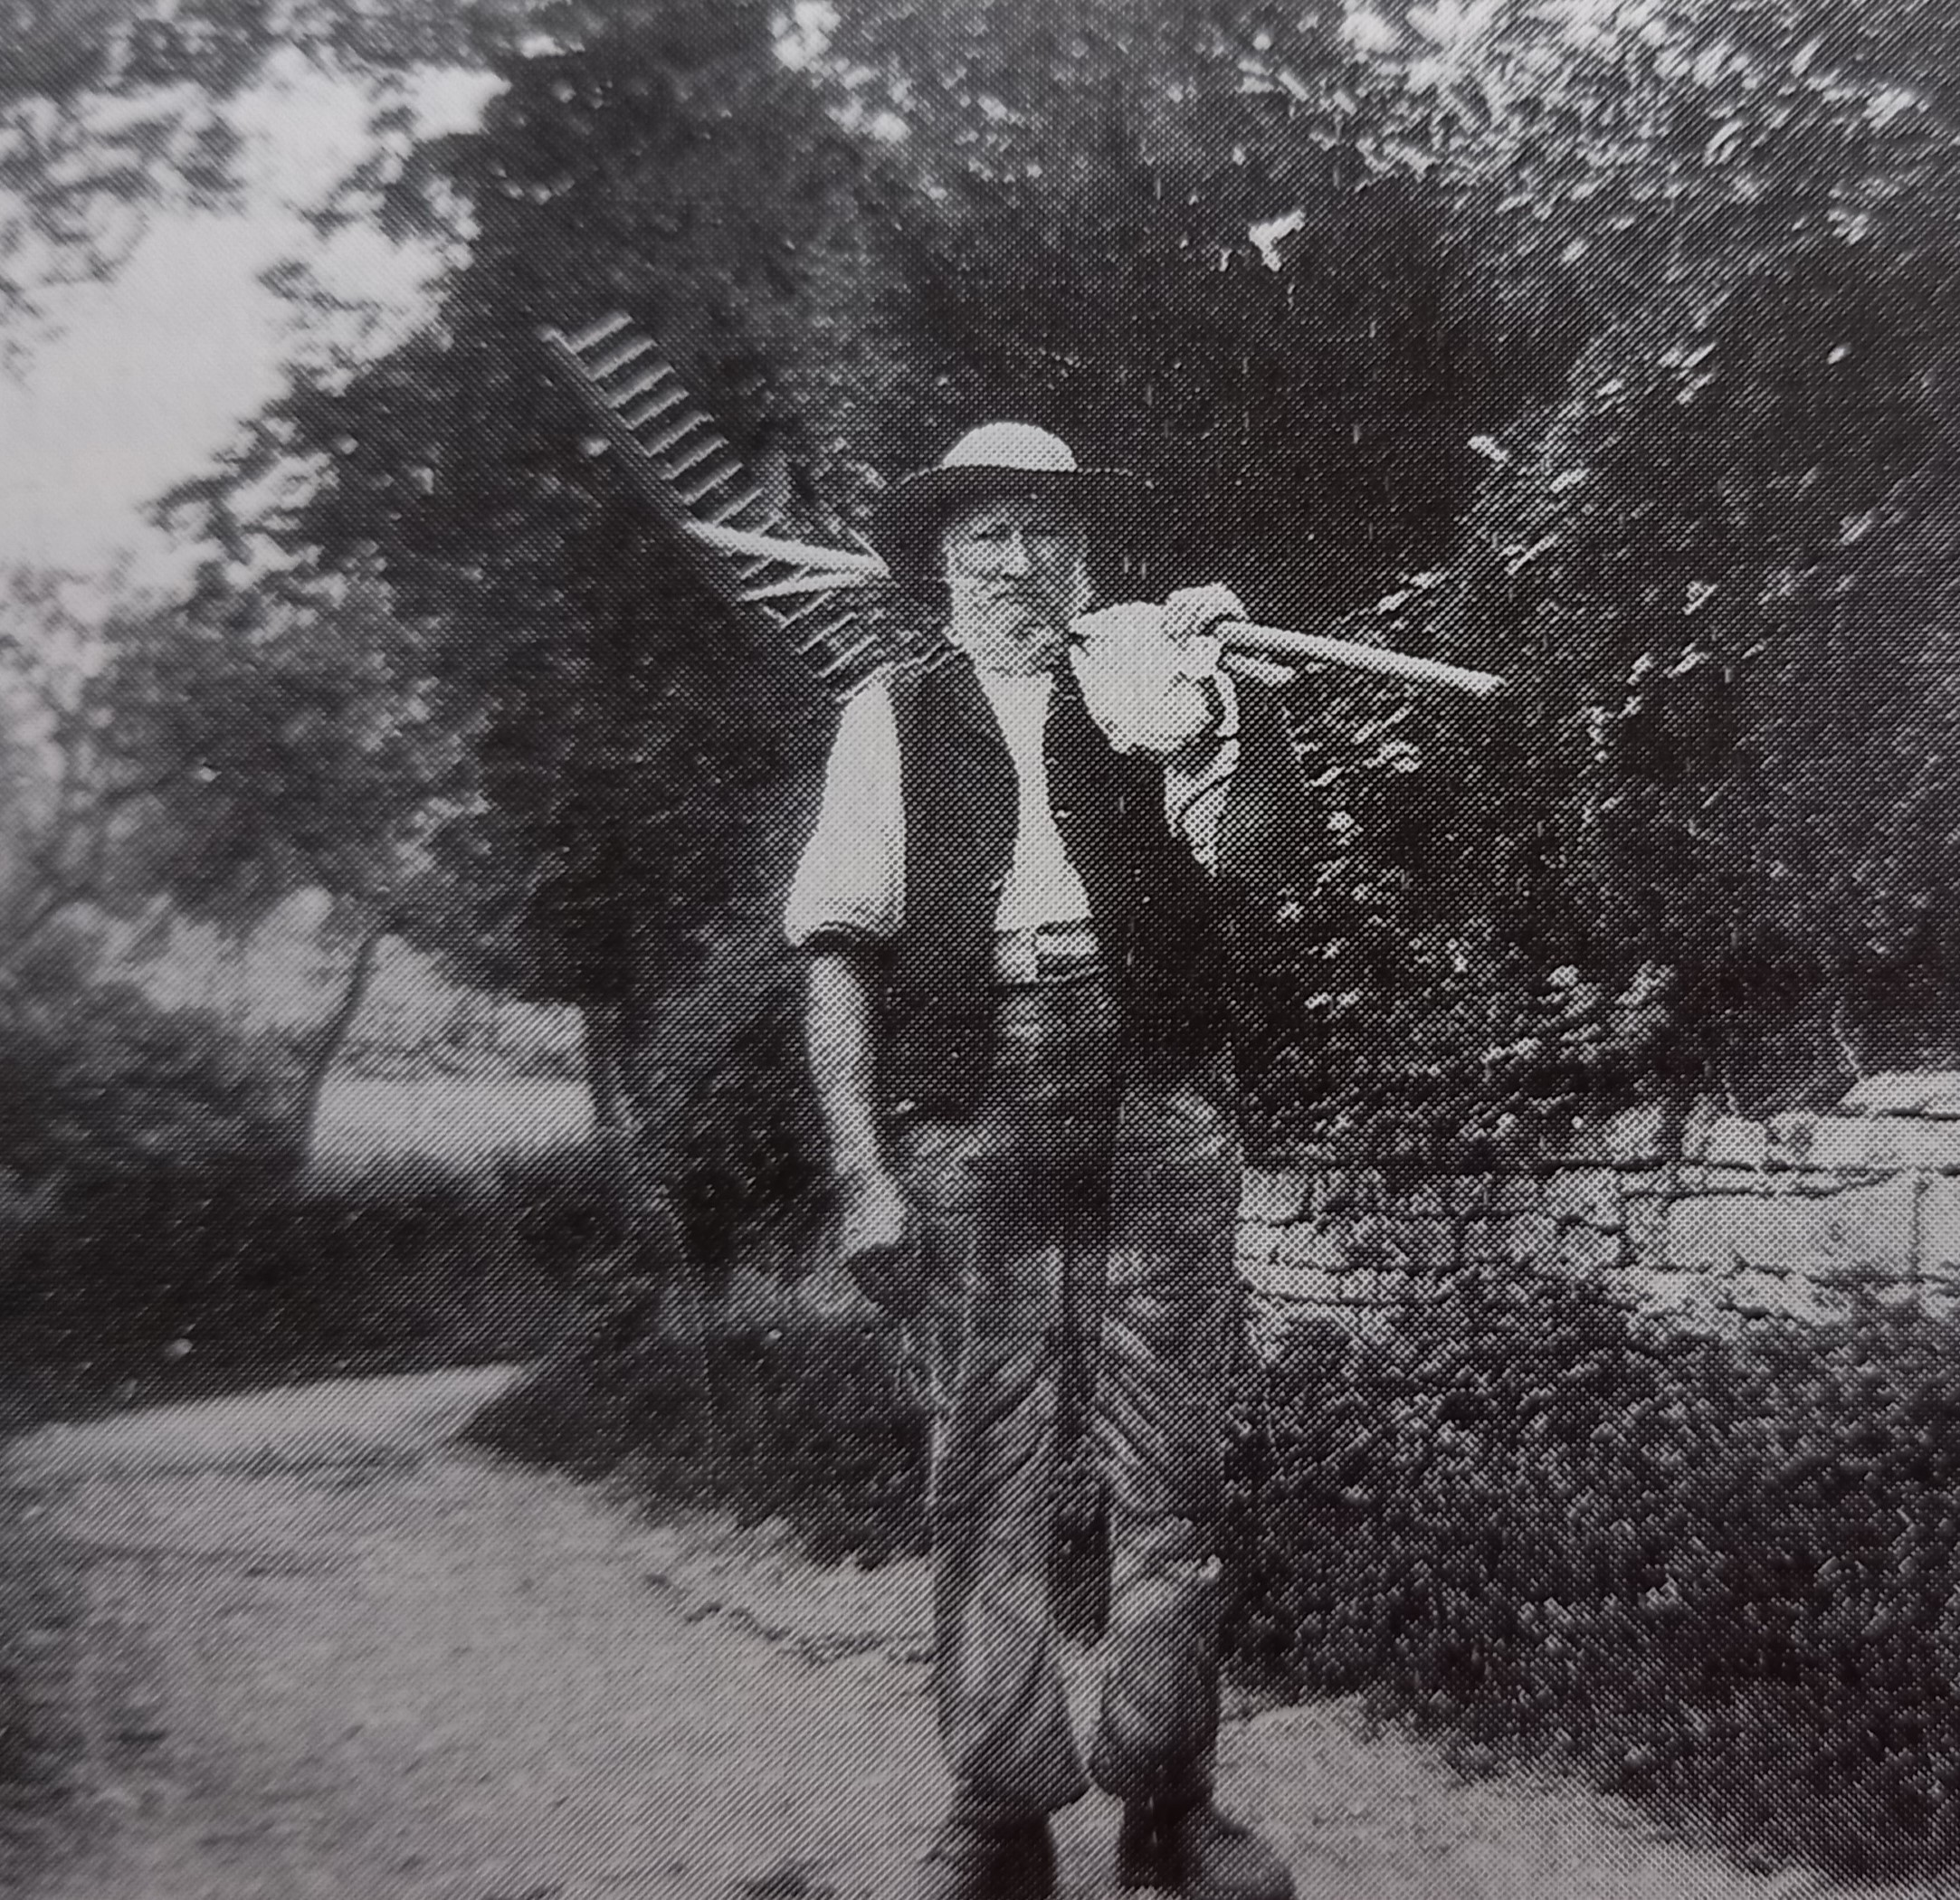 RAKISH FIGURE: An old Worcestershire farmworker carries a wooden rake in the late 1800s – looks like he’d been put in a cage to be pecked at